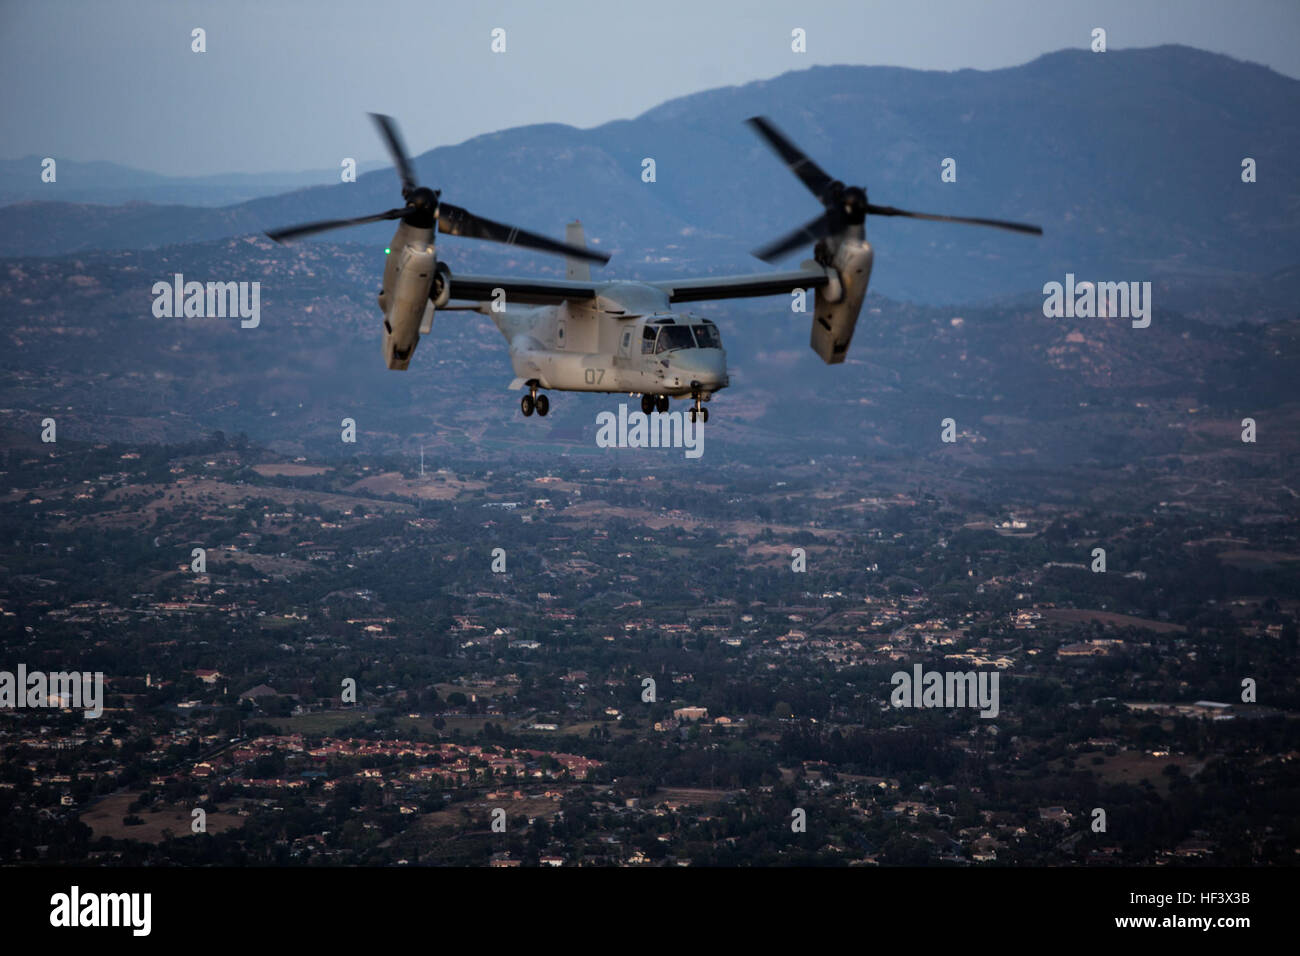 An MV-22B Osprey with Marine Medium Tiltrotor Squadron (VMM) 364 “Purple Foxes” flies over Southern California, April 5. Marines with VMM-364 and VMM-165 “White Knights” conducted division confined area landings before returning to their air stations. (U.S. Marine Corps photo by Sgt. Lillian Stephens/Released) VMM-364 'Purple Foxes,E2809D VMM-165 'White KnightsE2809D take to the skies, conduct confined area landings 160405-M-QU349-458 Stock Photo